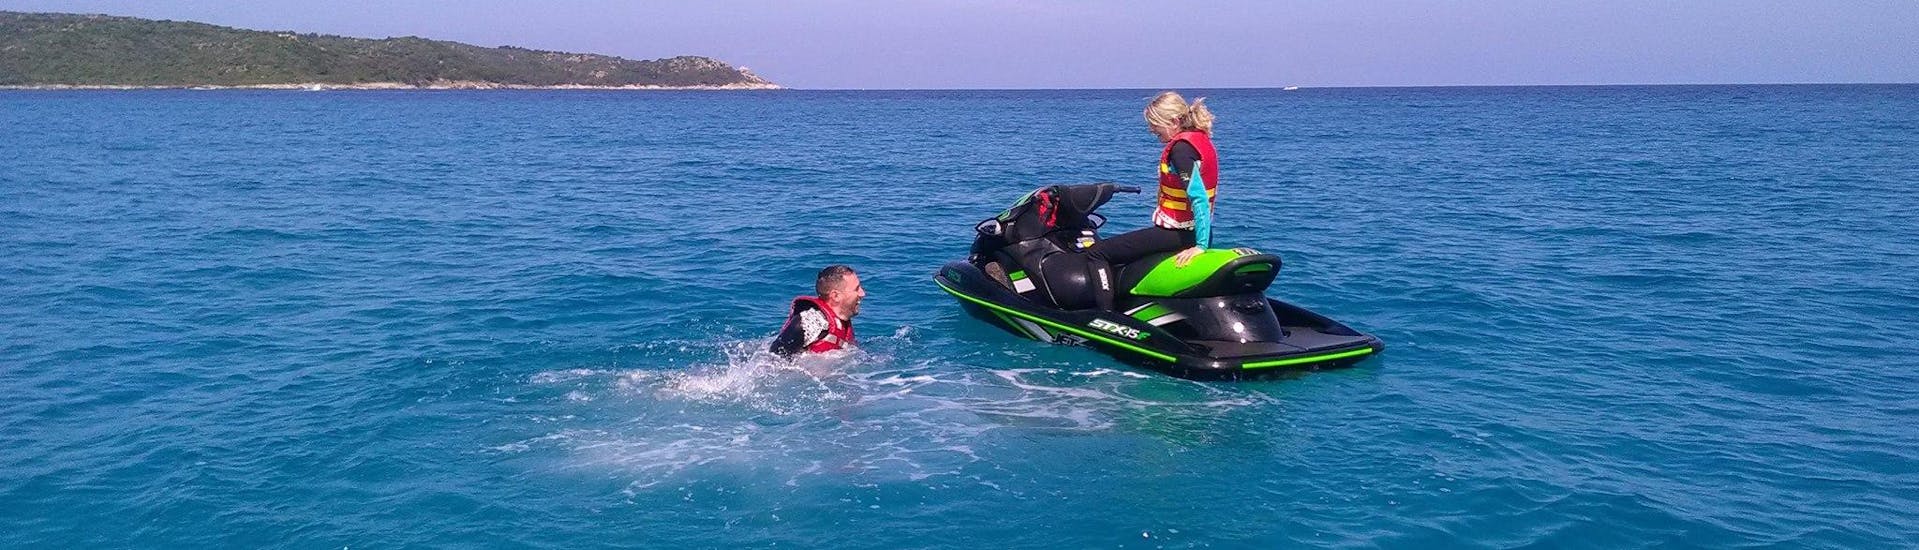 A person on a Gliss1Flo jet ski during a jet ski ride in Saint-Florent.